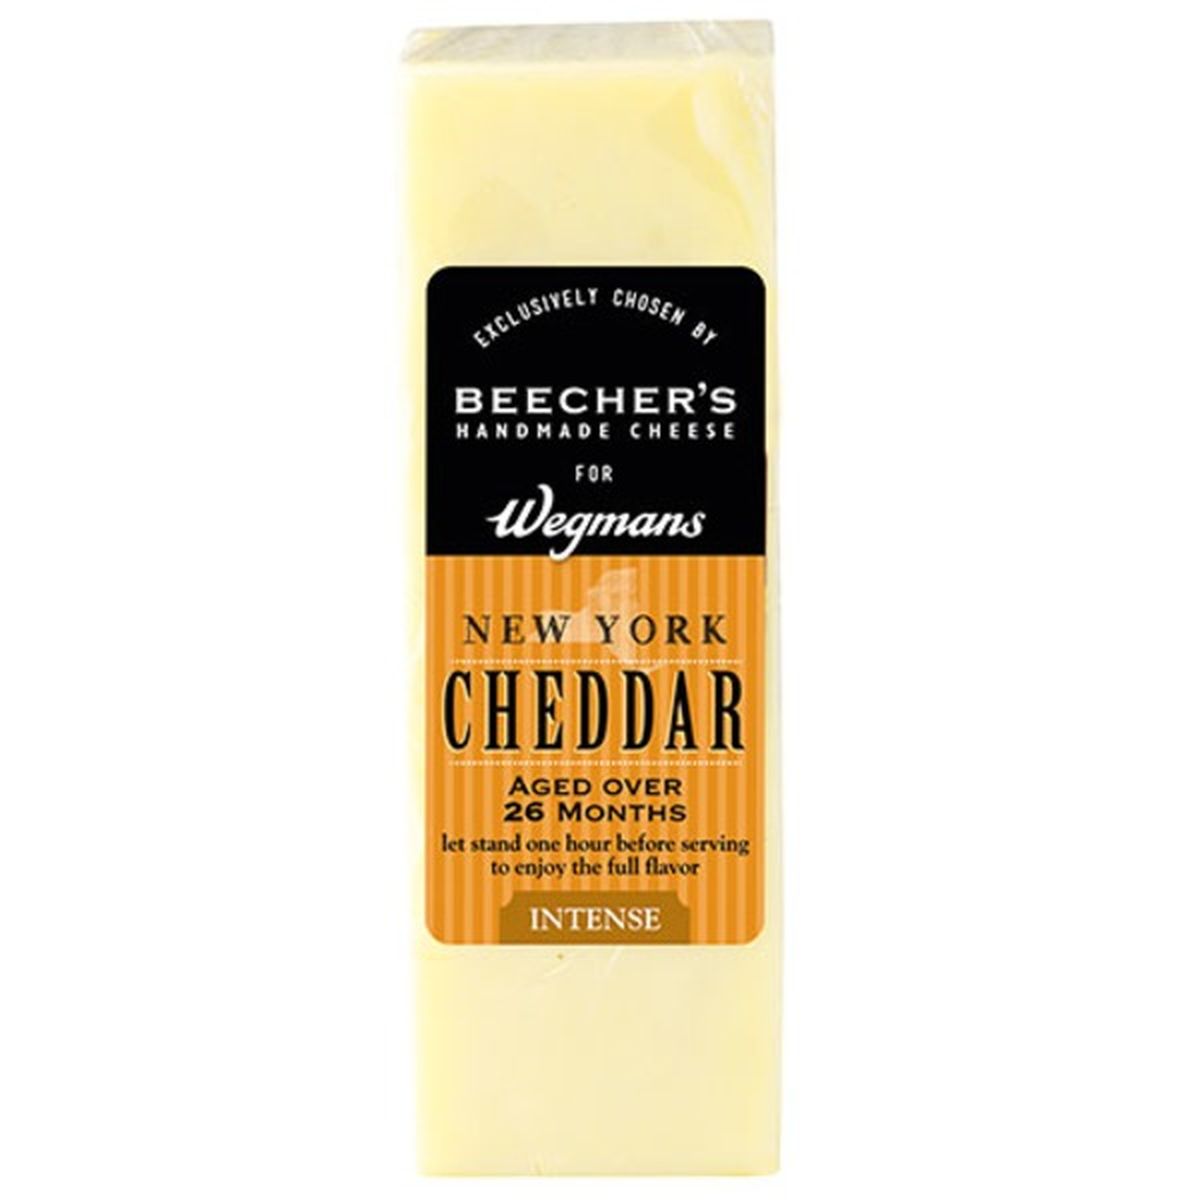 Calories in Wegmans 26 Month Aged Cheddar Cheese, Intense